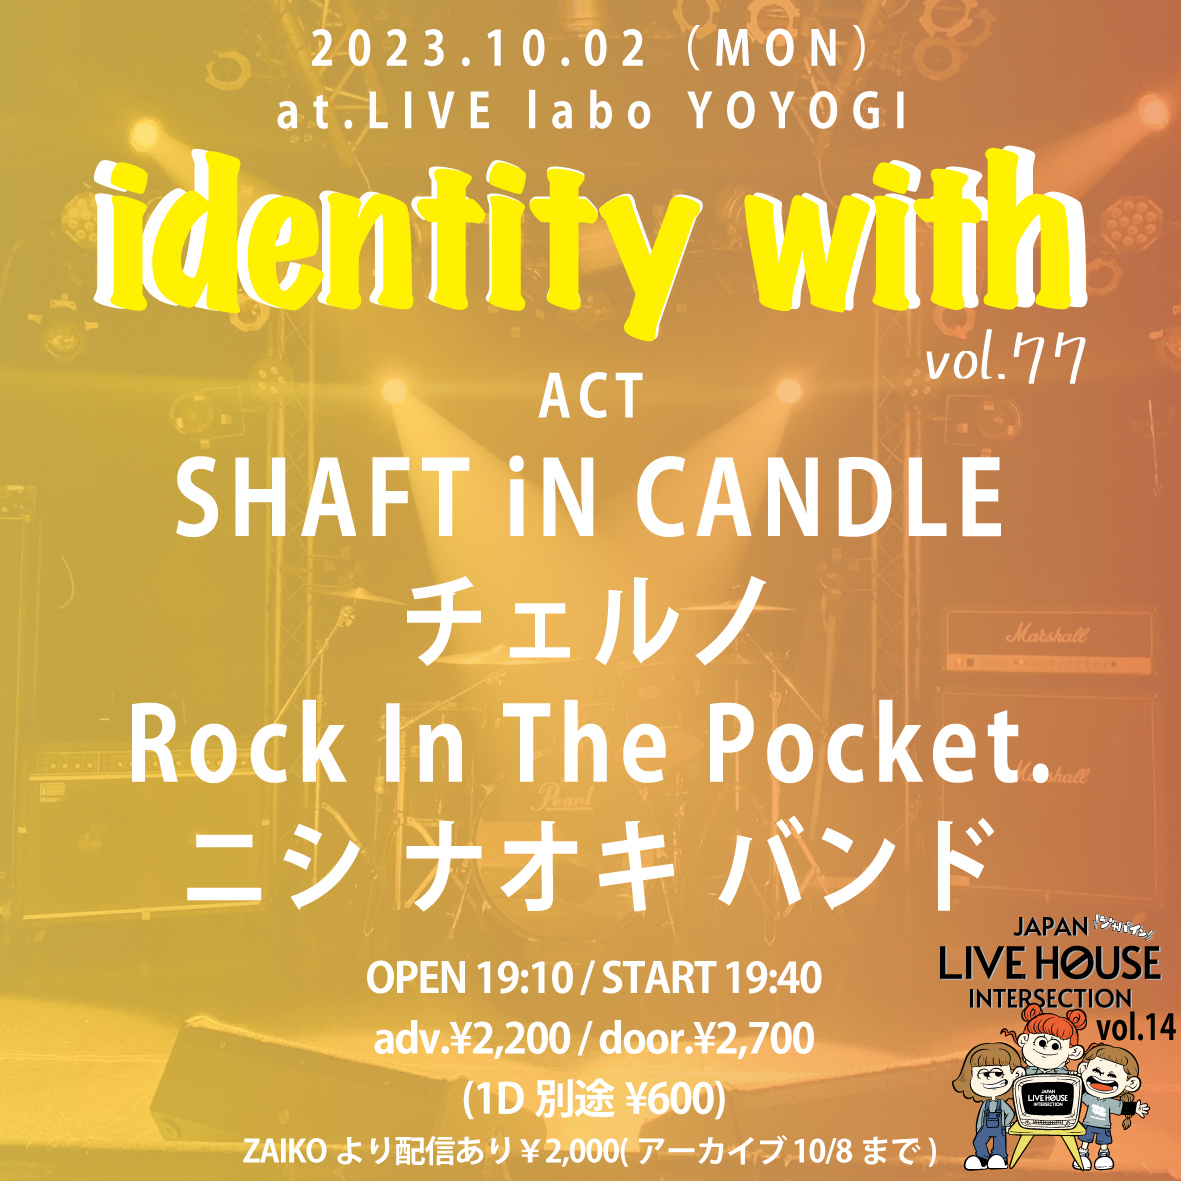 identity with vol.77 -JAPAN LIVE HOUSE INTERSECTION vol.14-